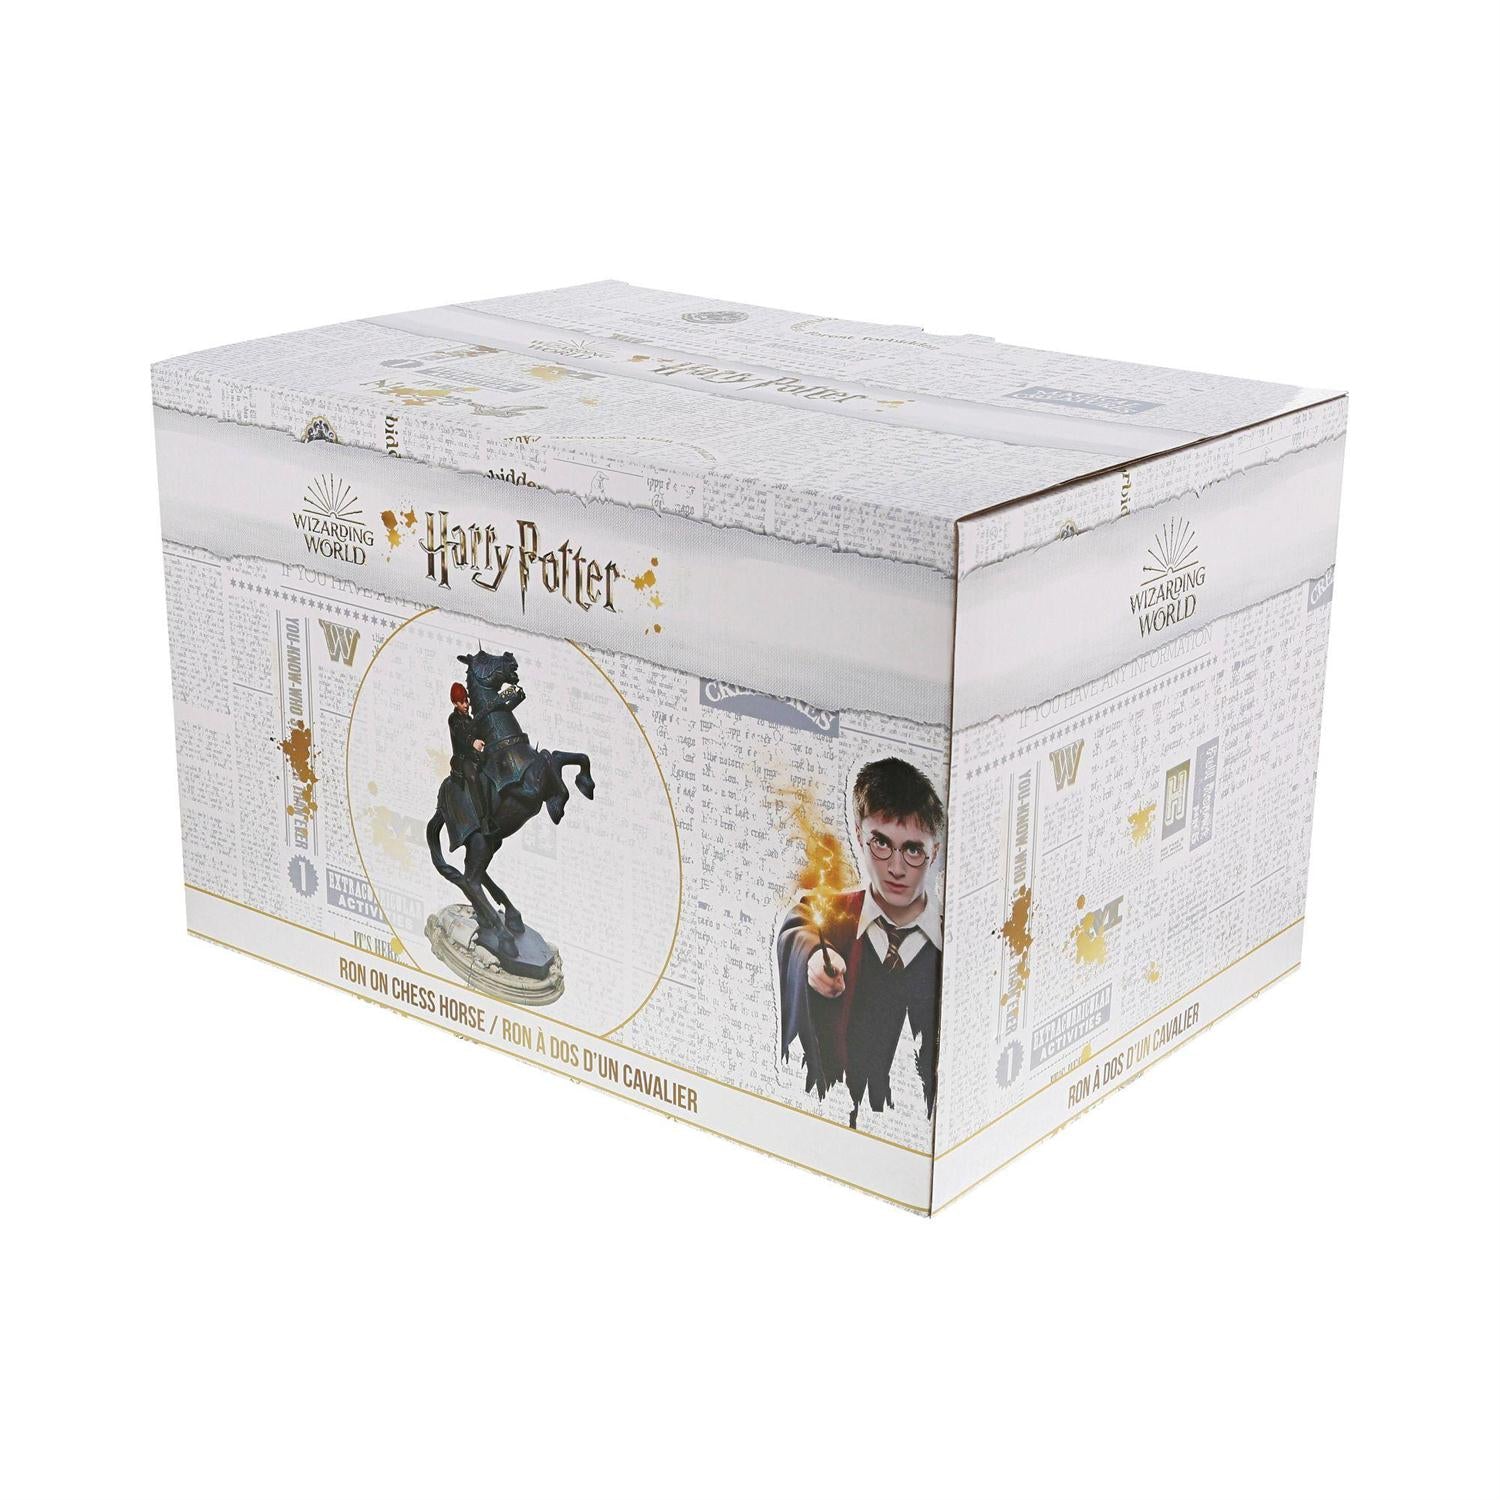 Package decorative box